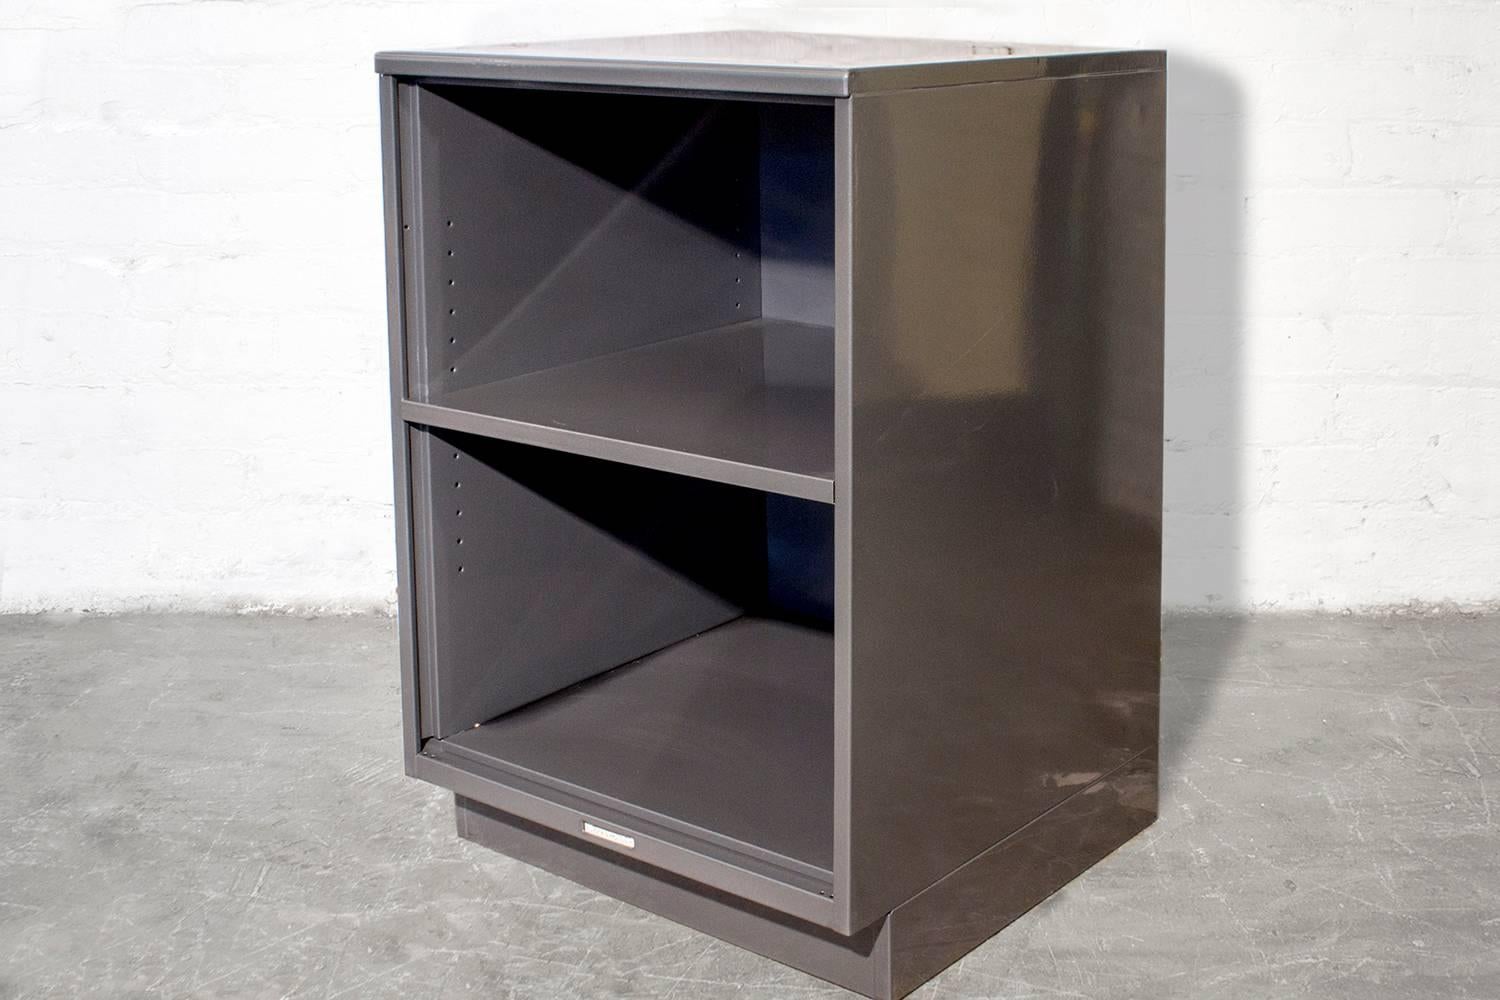 This 1960s Industrial "lowboy" cabinet by Steelcase is freshly powder-coated and in excellent condition. A versatile piece, it functions perfectly as an office cabinet, bedside table or anything in between. This All-American Steelcase is a